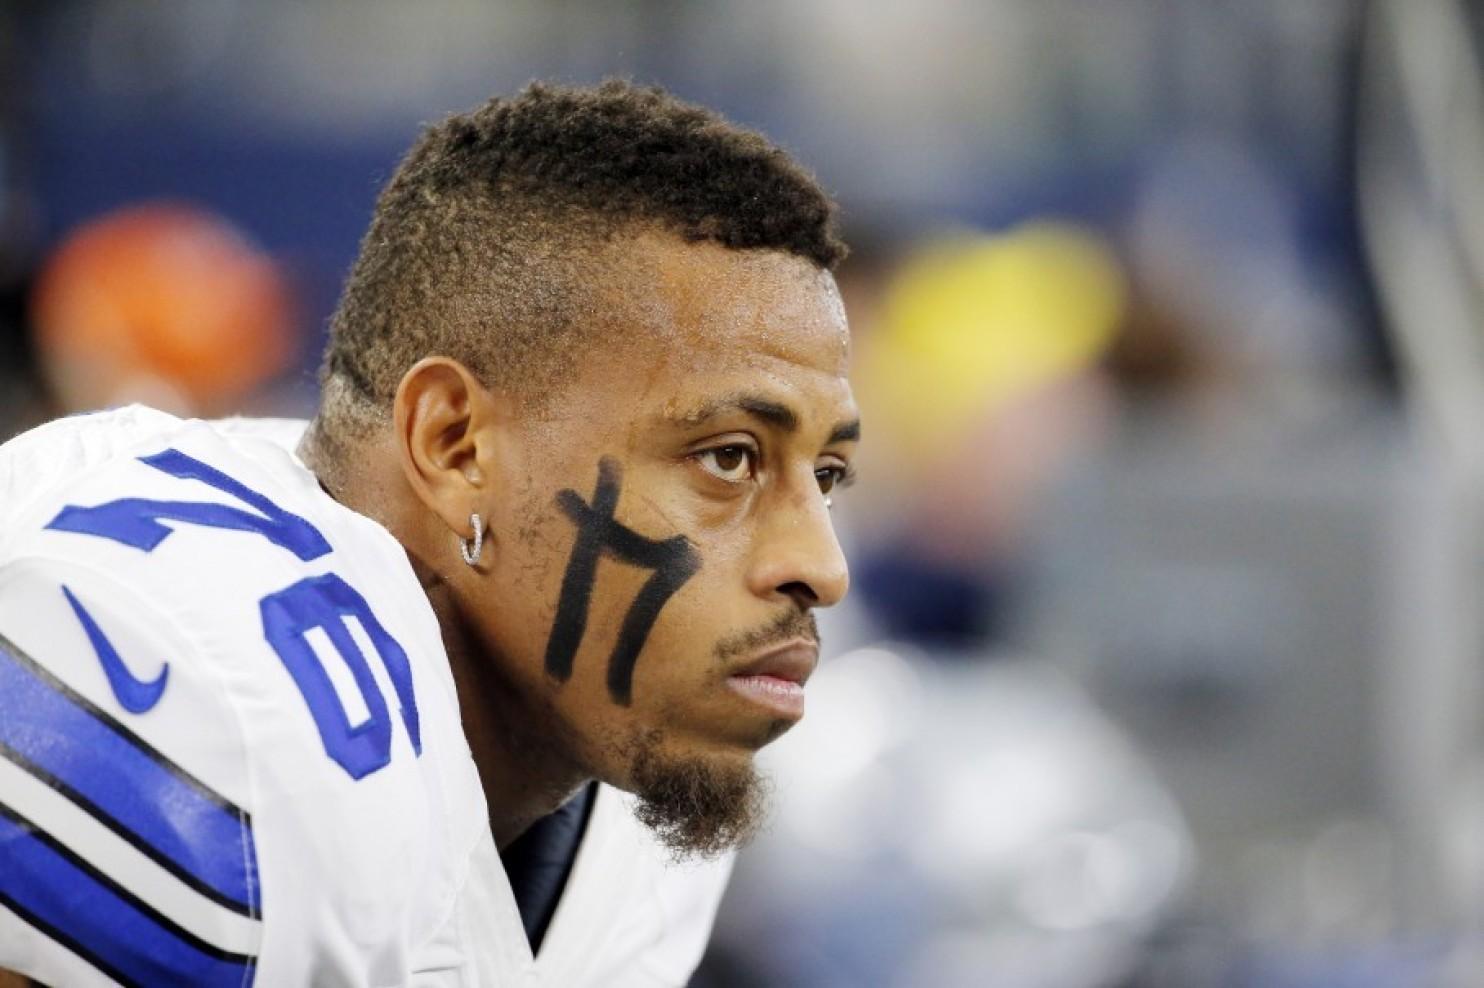 Dallas Cowboys defensive end Greg Hardy was convicted for domestic abuse last year. The NFL only gave Hardy a four game suspension.